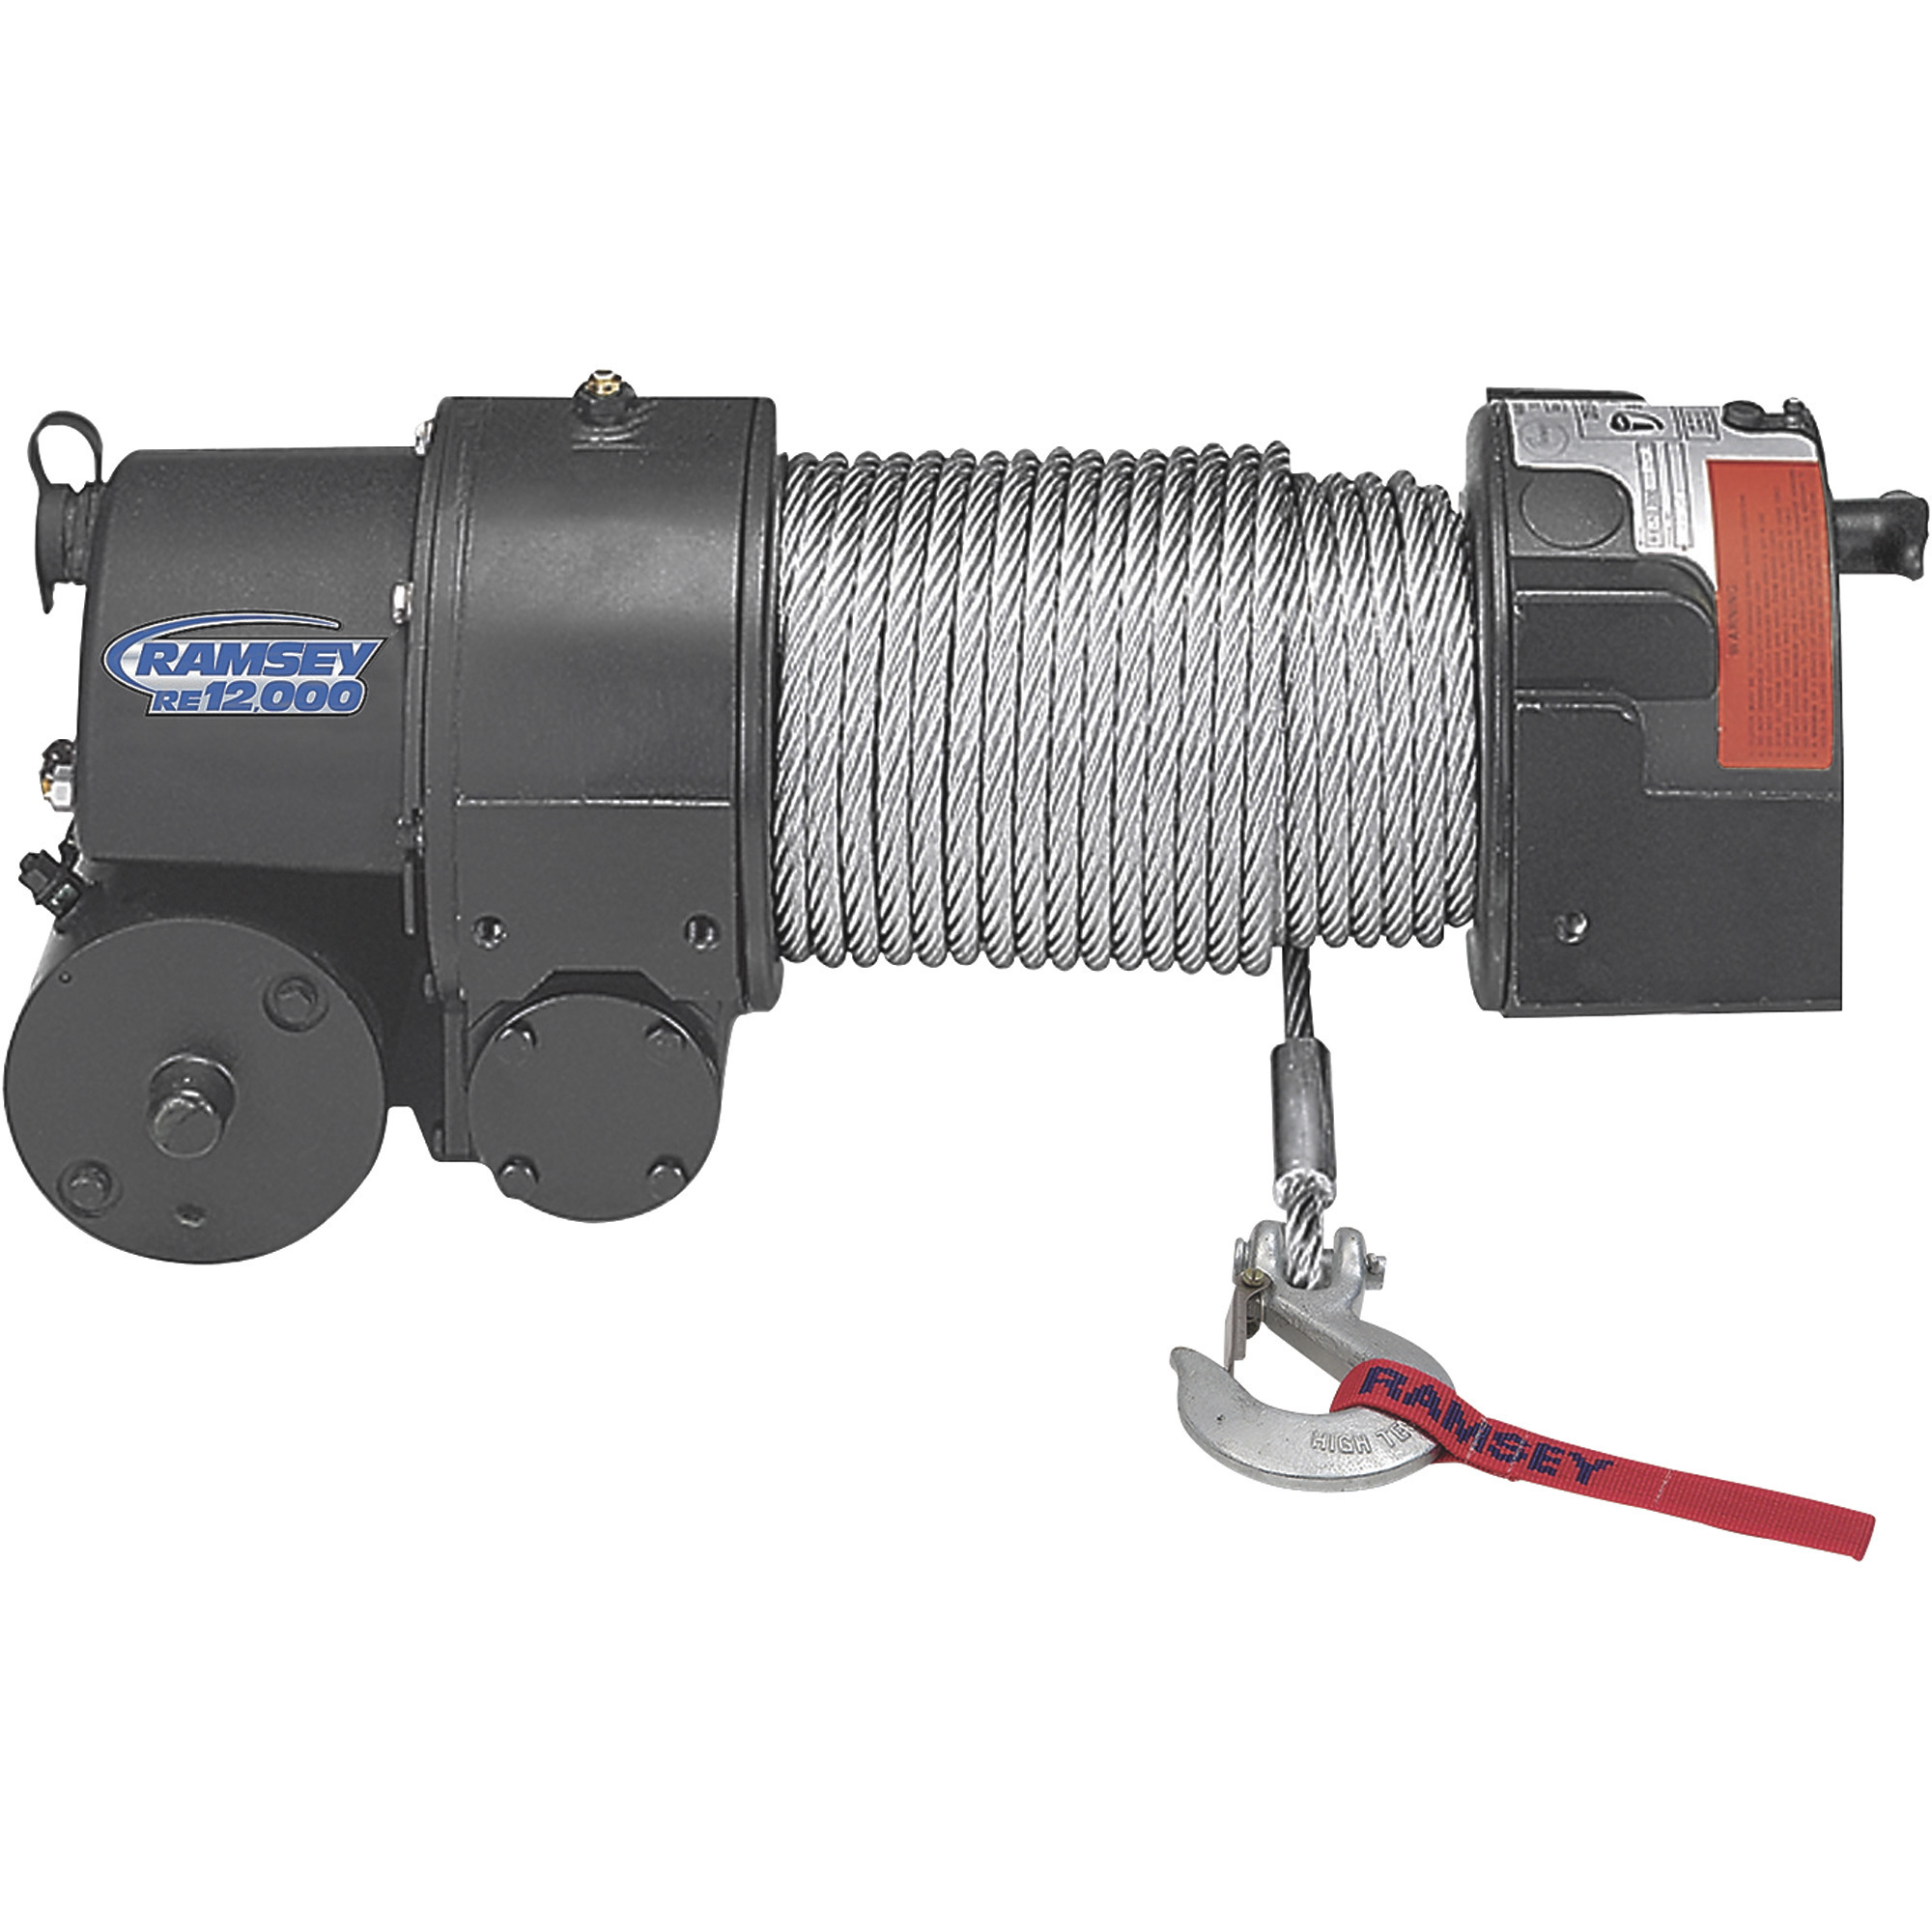 Ramsey Extra Heavy-Duty Front Mount 12 Volt DC Powered Electric Truck Winch â 12,000-Lb. Capacity, Galvanized Aircraft Cable, Model RE12000